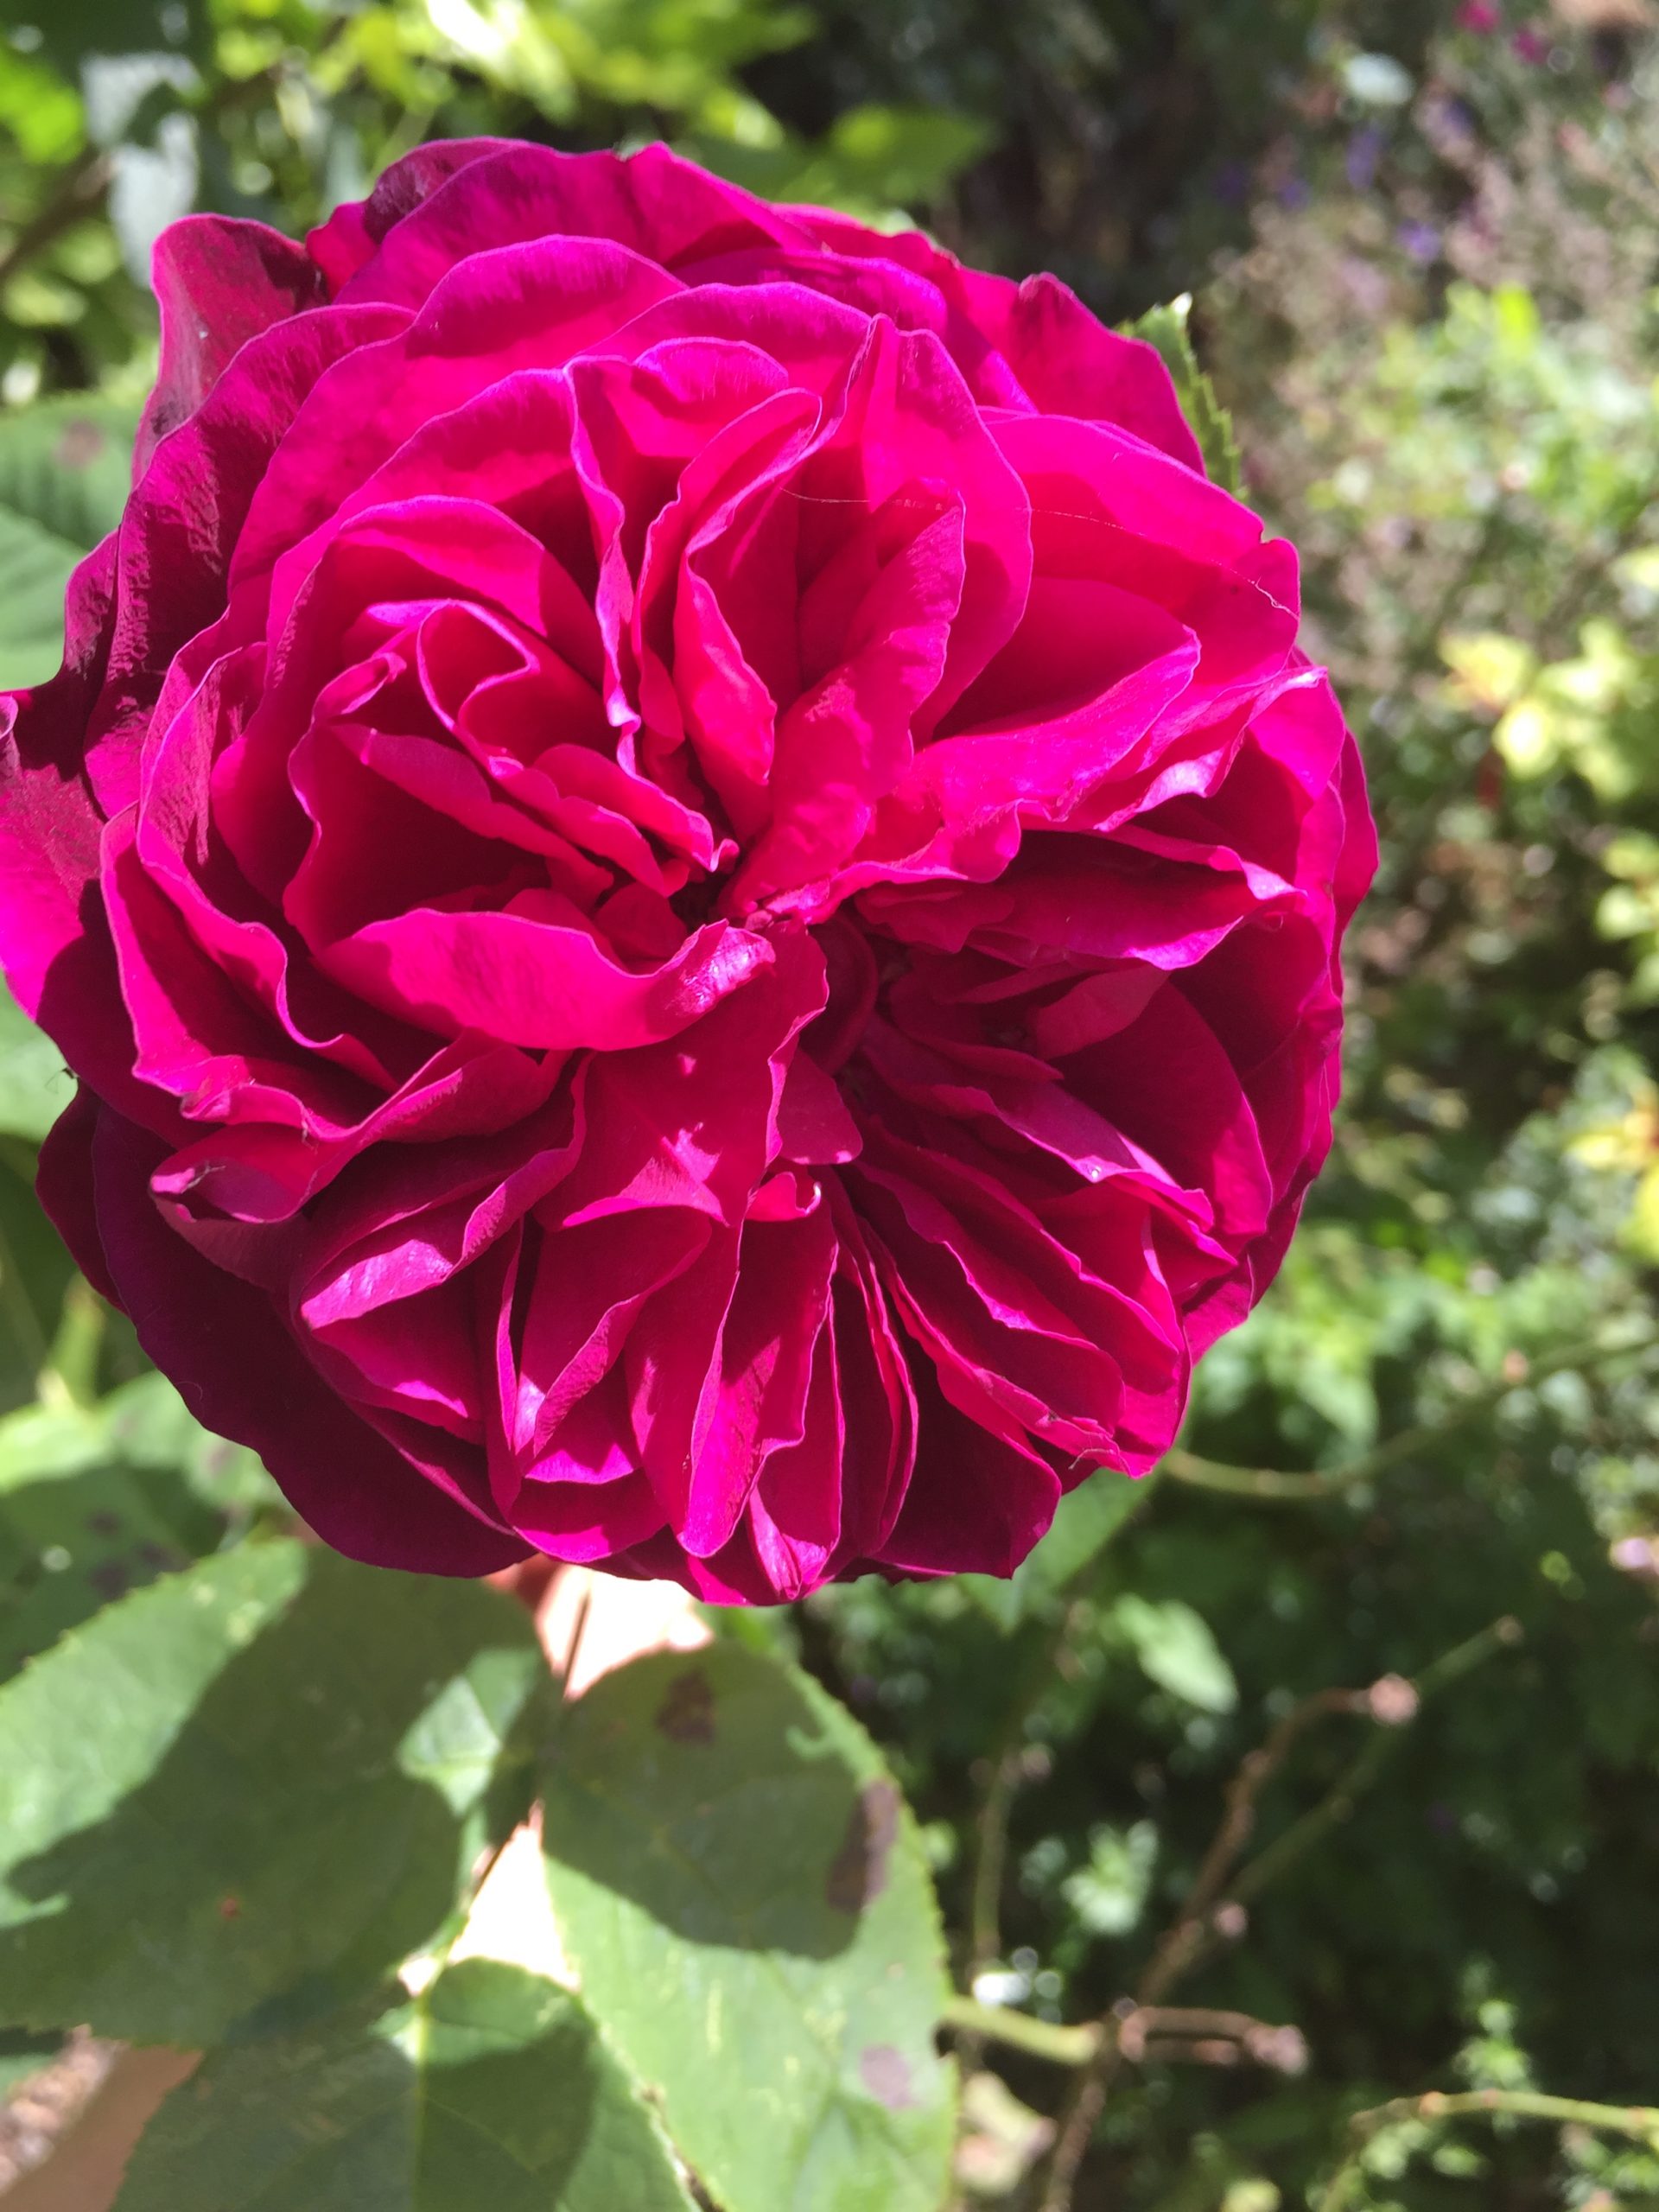 Damask rose is best for use with rosewater